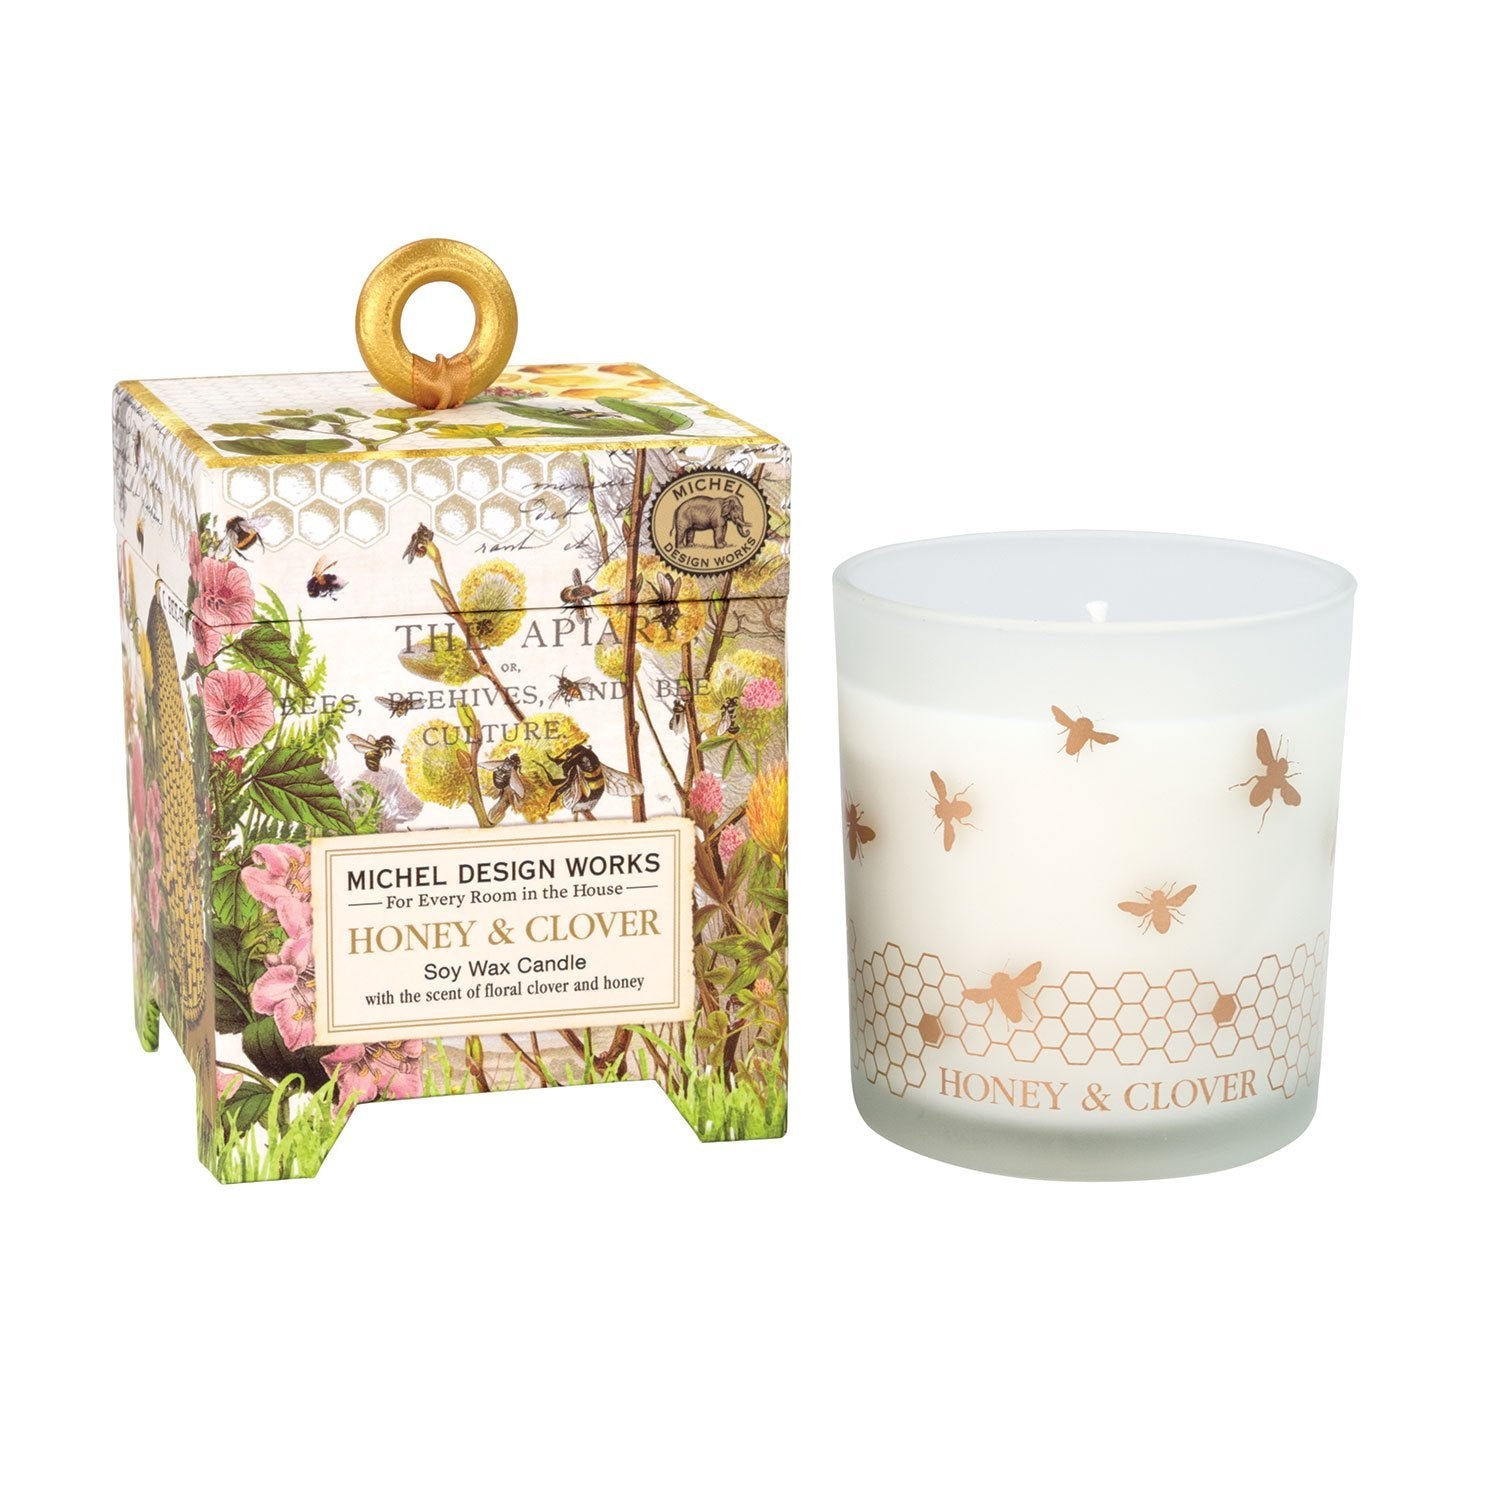 Honey & Clover - Soy Wax Candle    